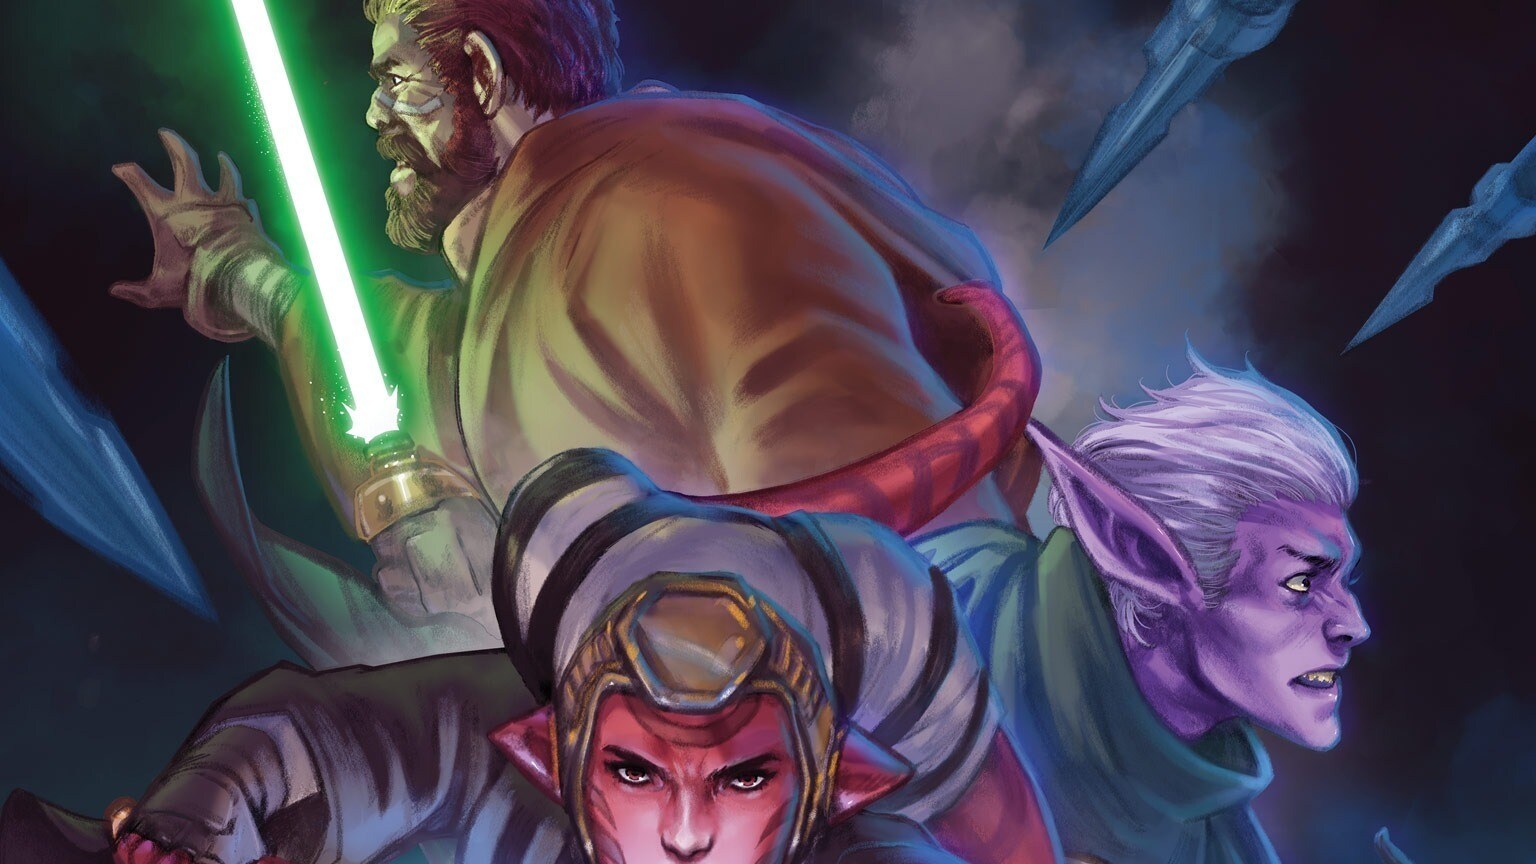 The Search for a Deadly Dark Sider Begins in Marvel’s Star Wars: The High Republic #2 - Exclusive Preview